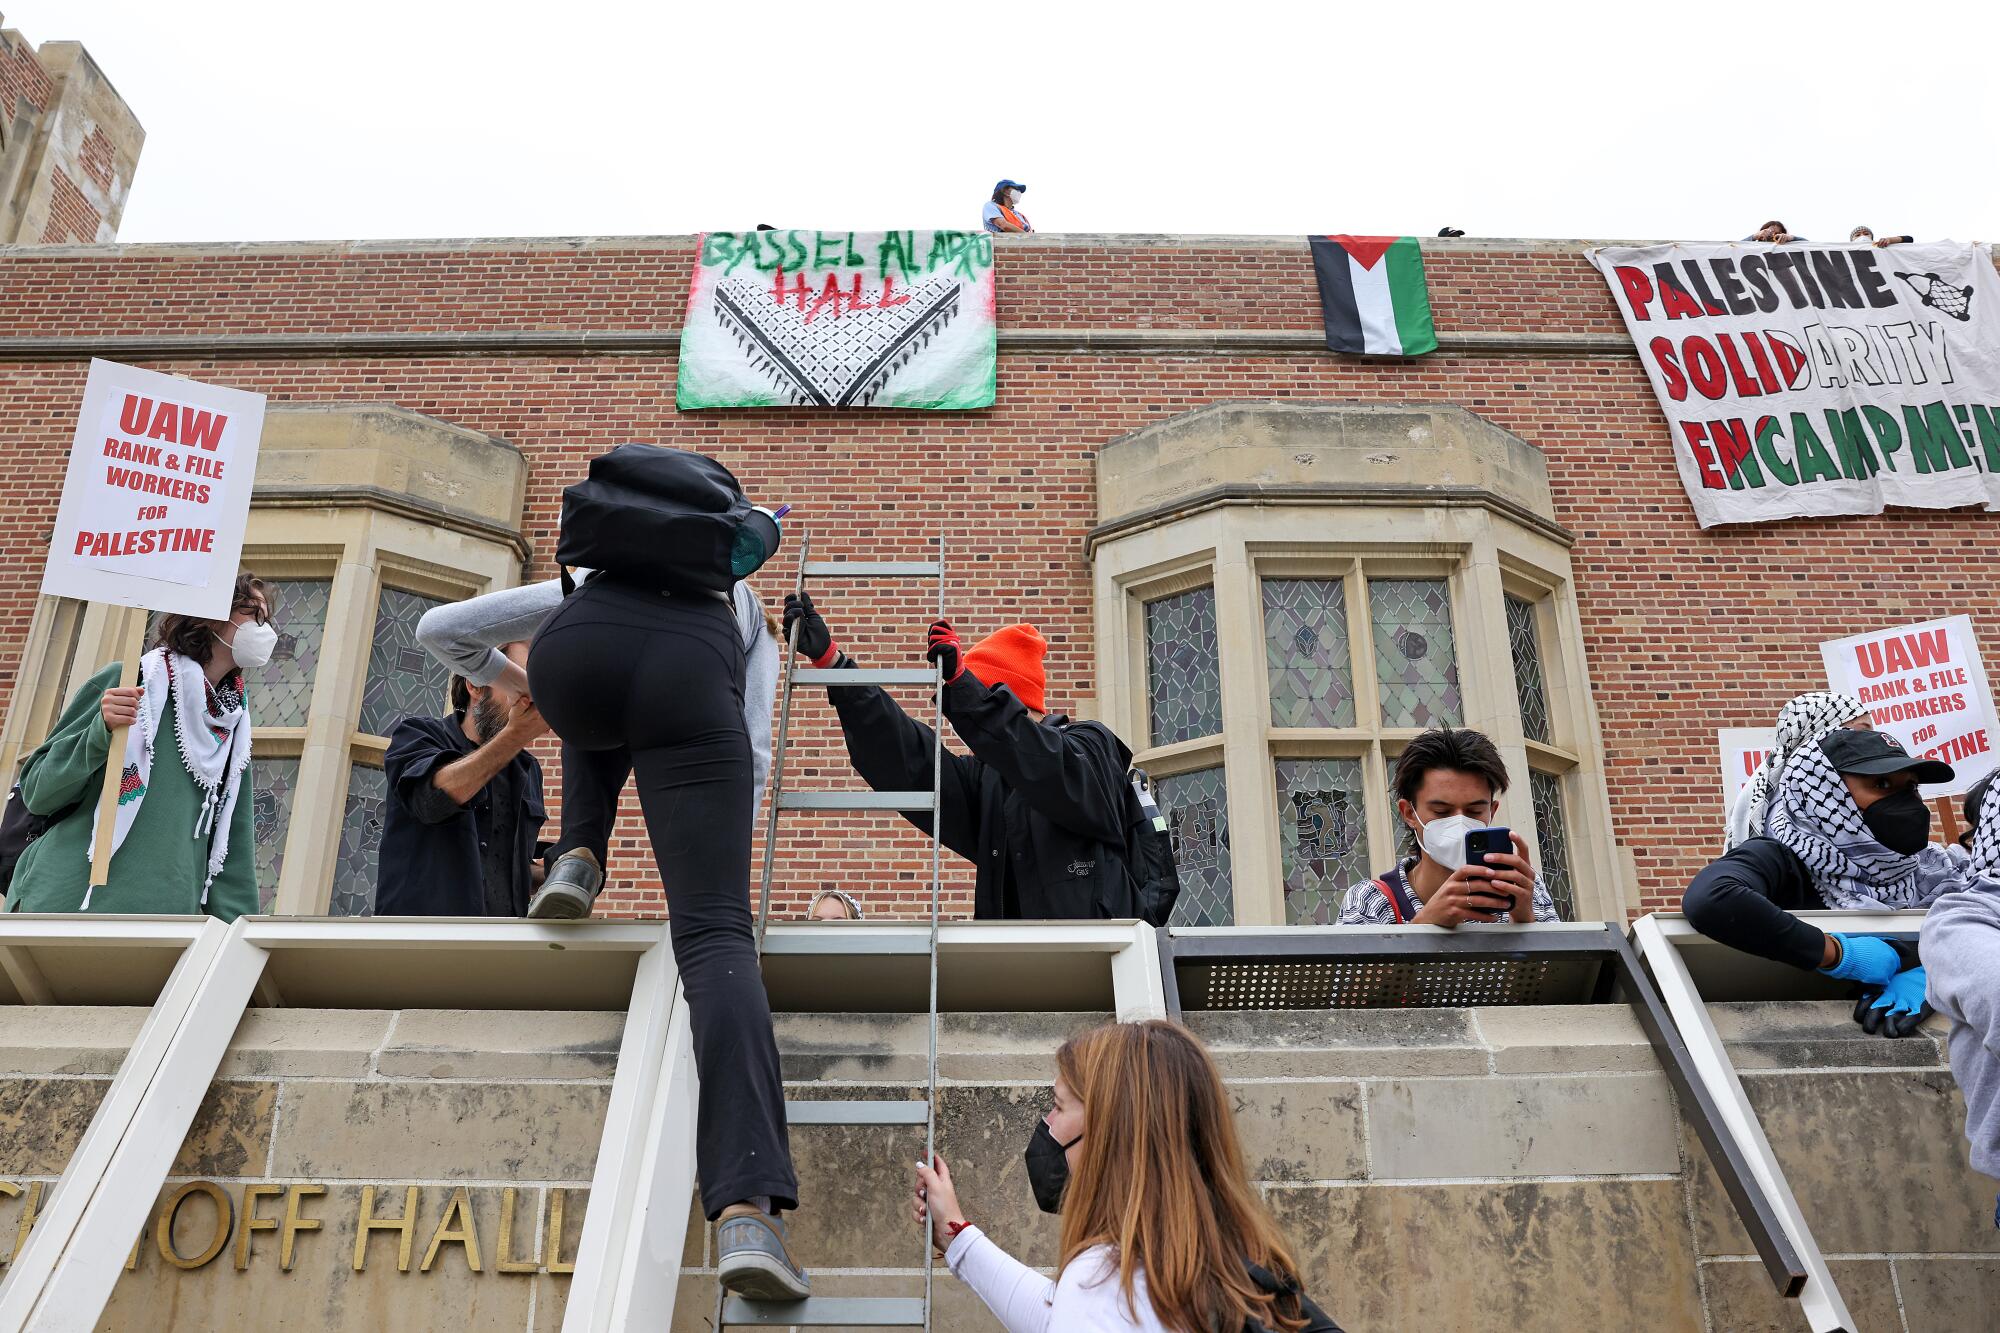 UCLA protesters climb up a ladder at Kerckhoff Hall as they try to build a new Palestinian solidarity encampment on Thursday.